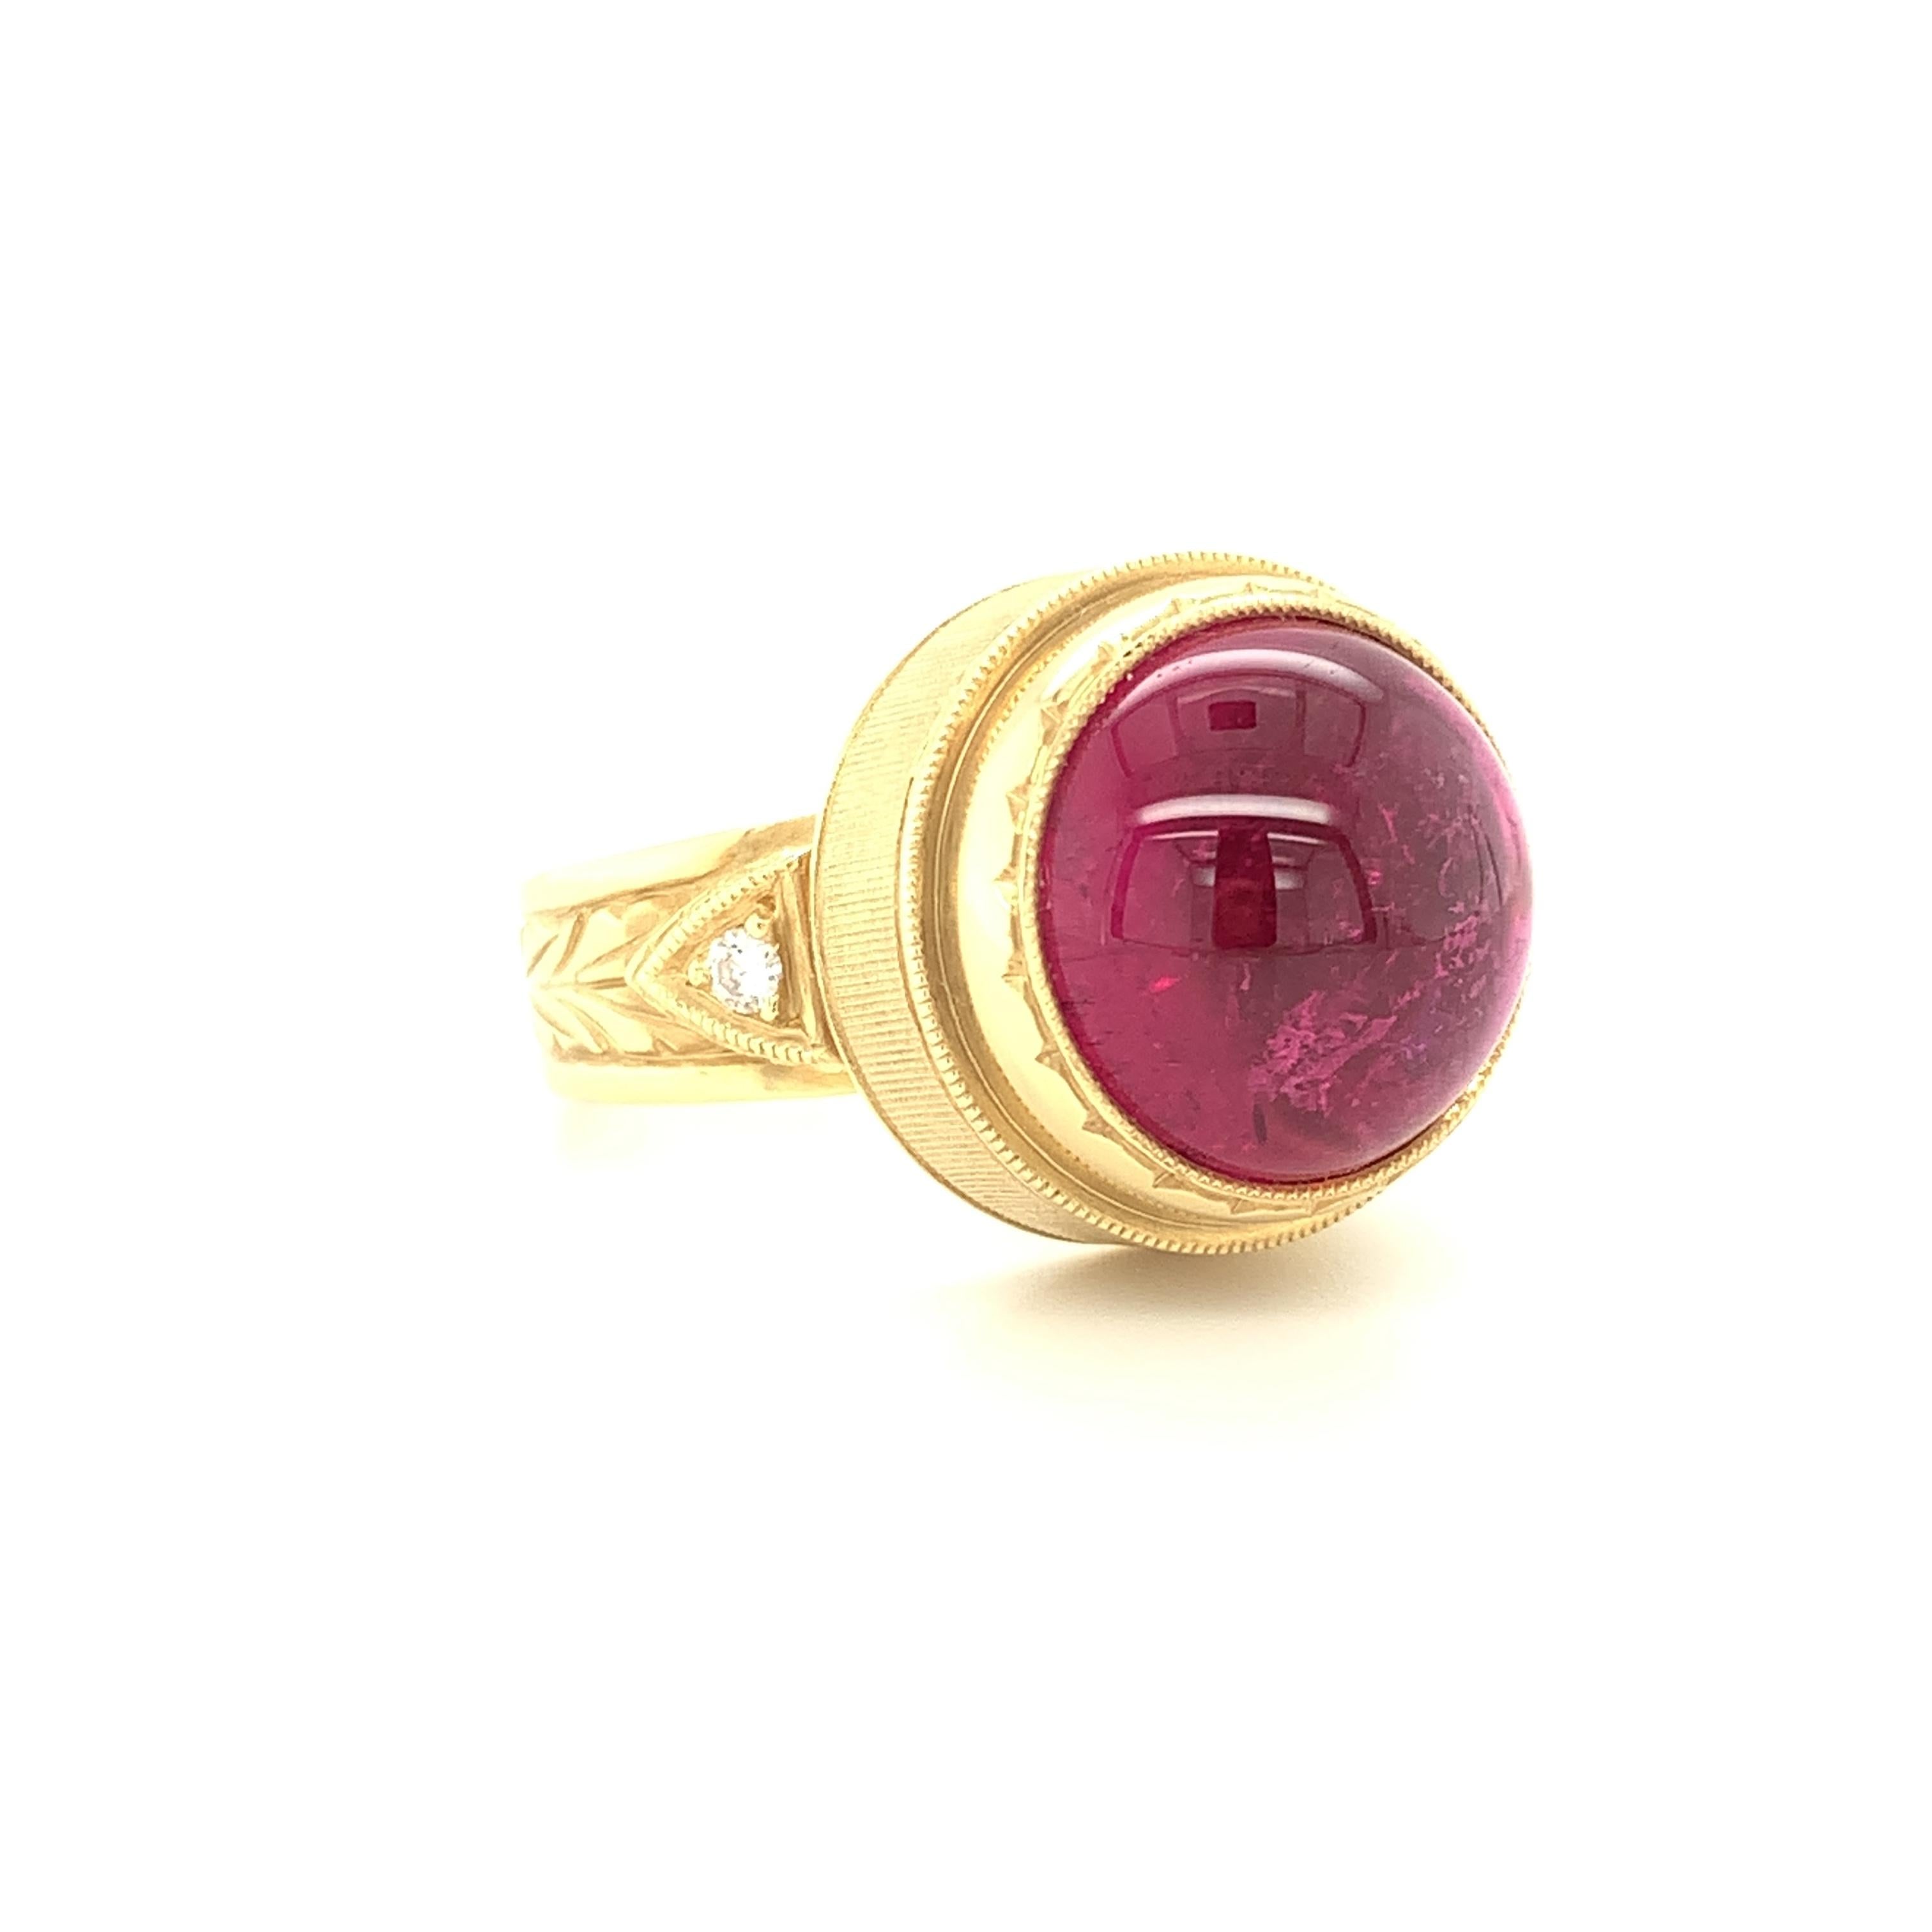 Antique Cushion Cut 10.75 Carat Rubellite Tourmaline Cabochon and Diamond Engraved Band Ring  For Sale